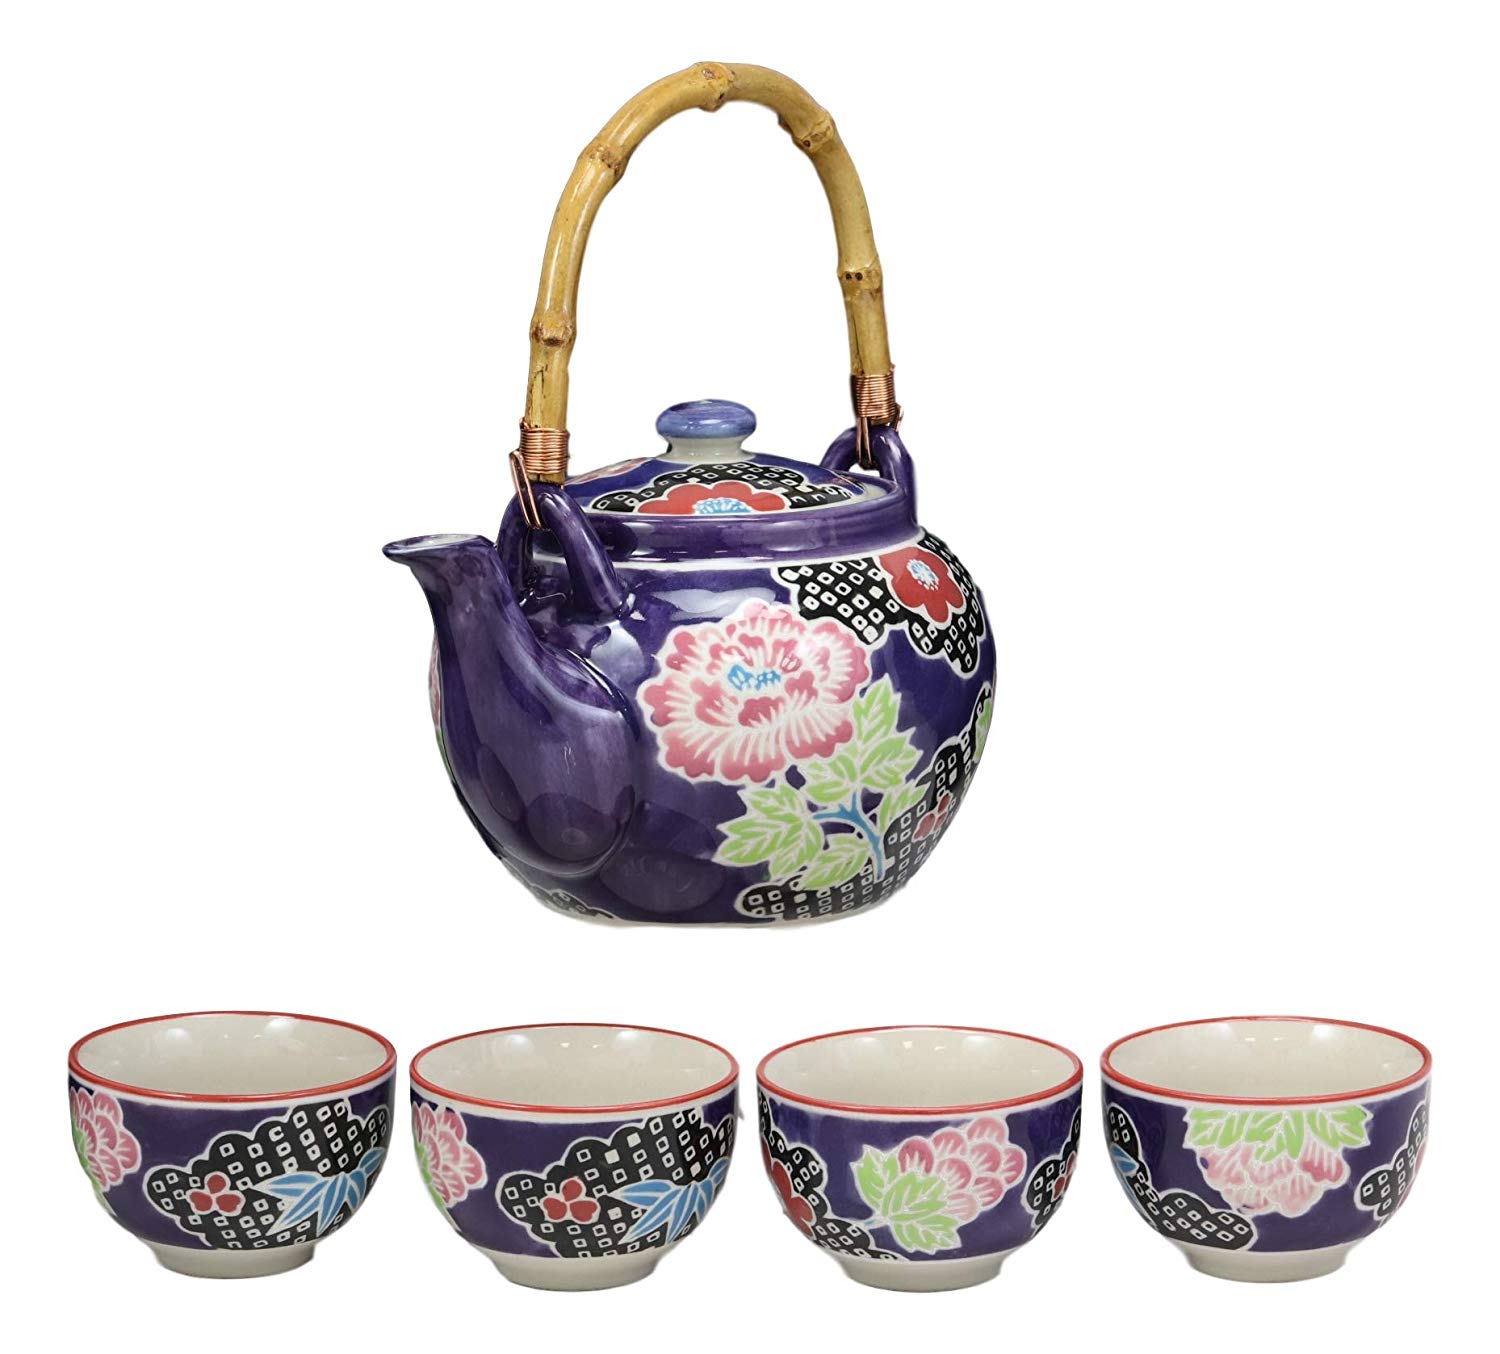 Space Purple Victorian Colorful Large Floral Blooms 25oz Tea Pot With 4 Cups Set - image 4 of 7